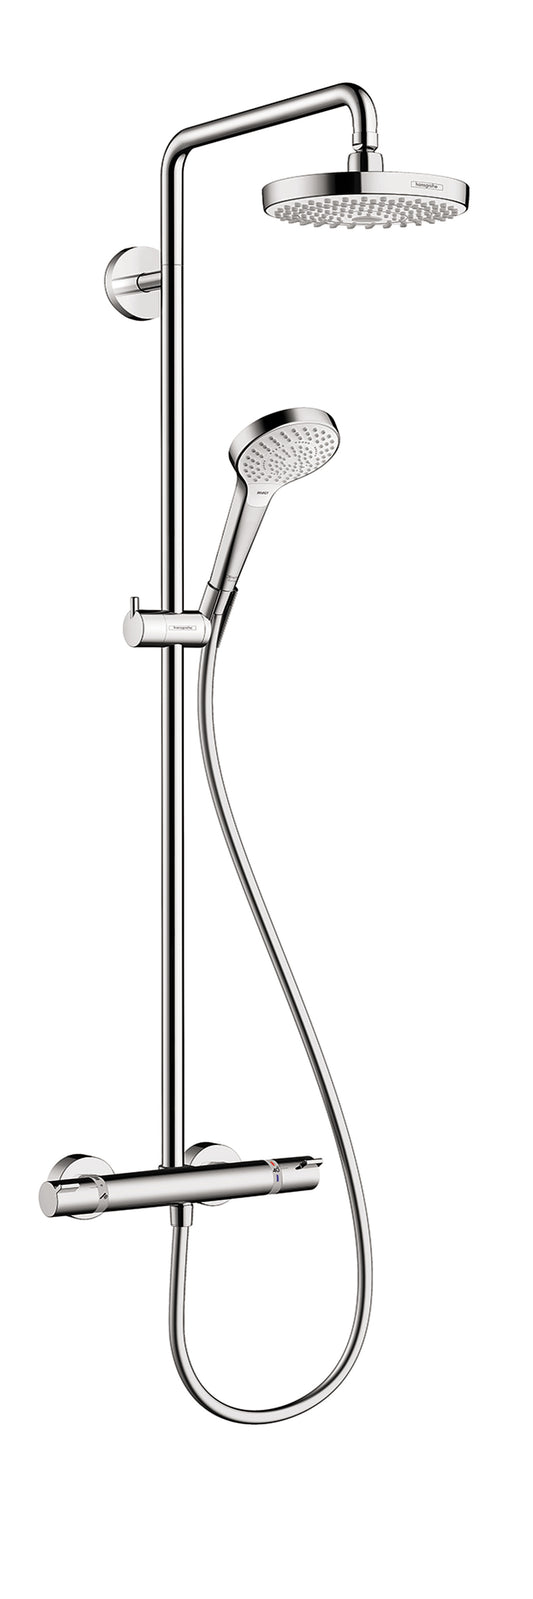 HANSGROHE 27254001 Chrome Croma Select S Modern Showerpipe 2 GPM